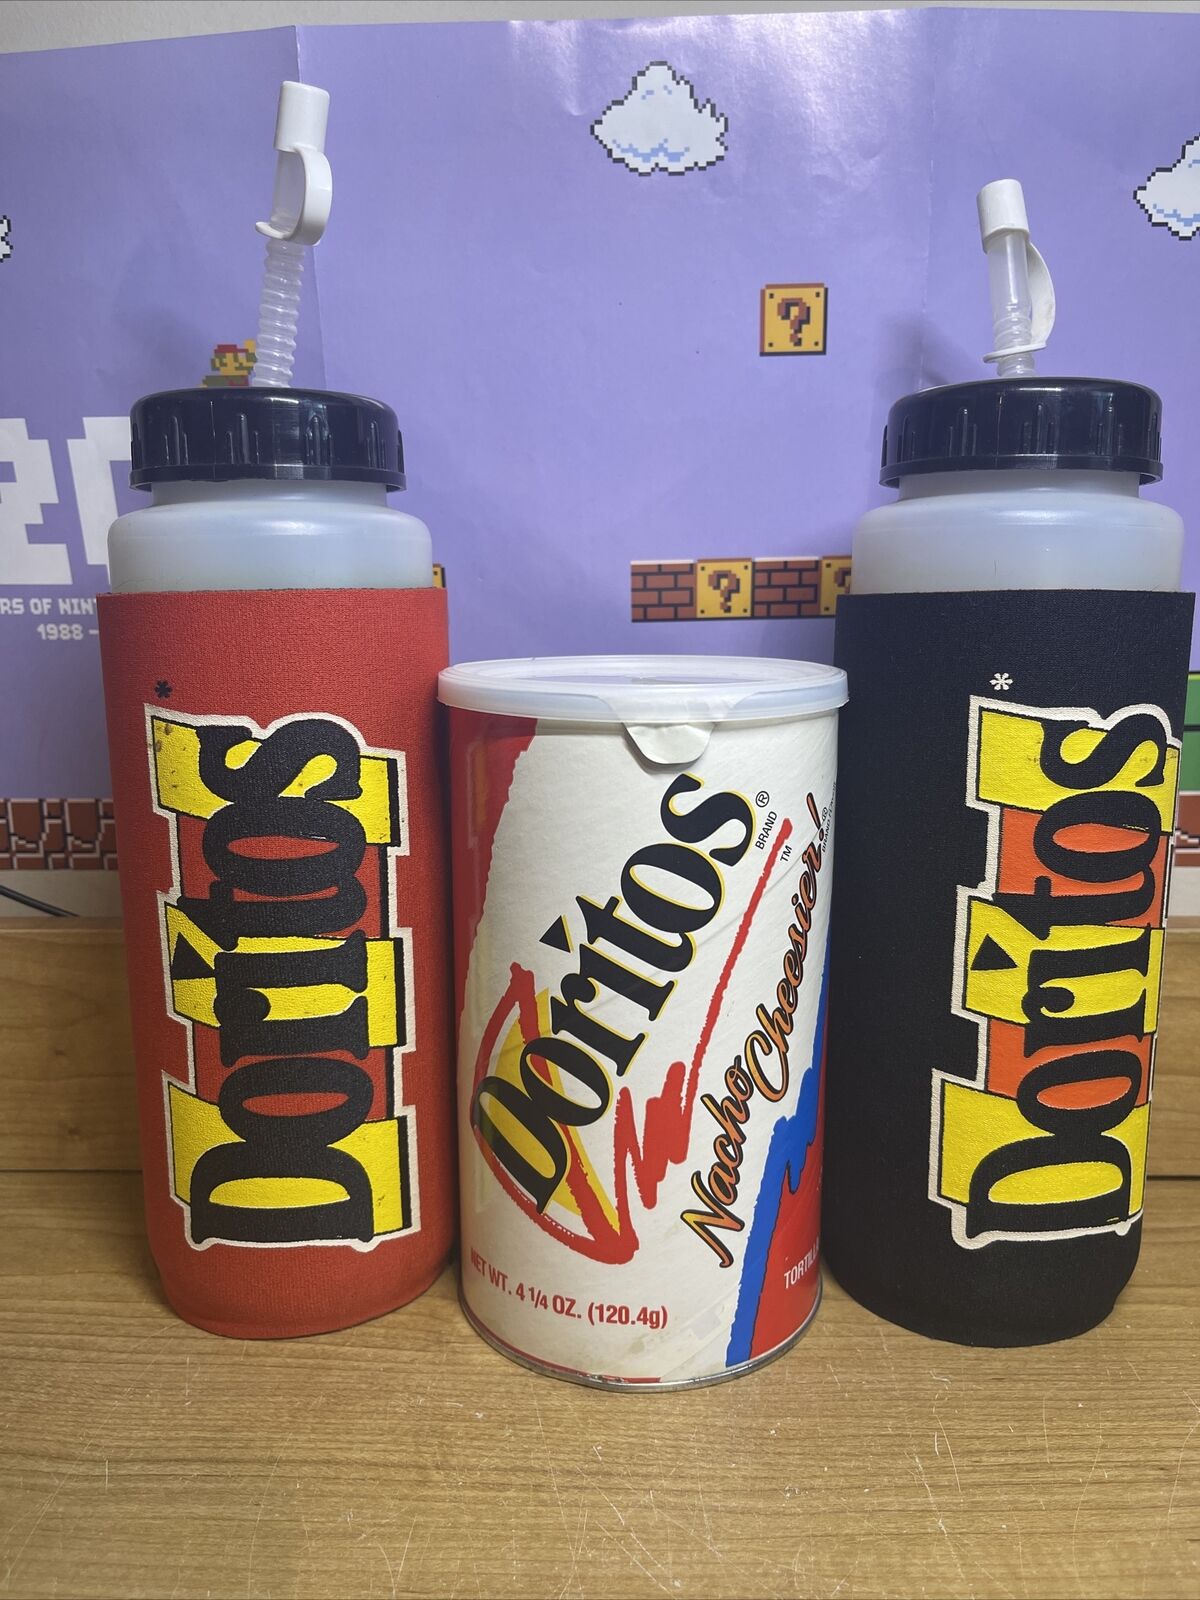 Vintage 1990's Promo Doritos Bottle and Chip Container FRITO LAYS.